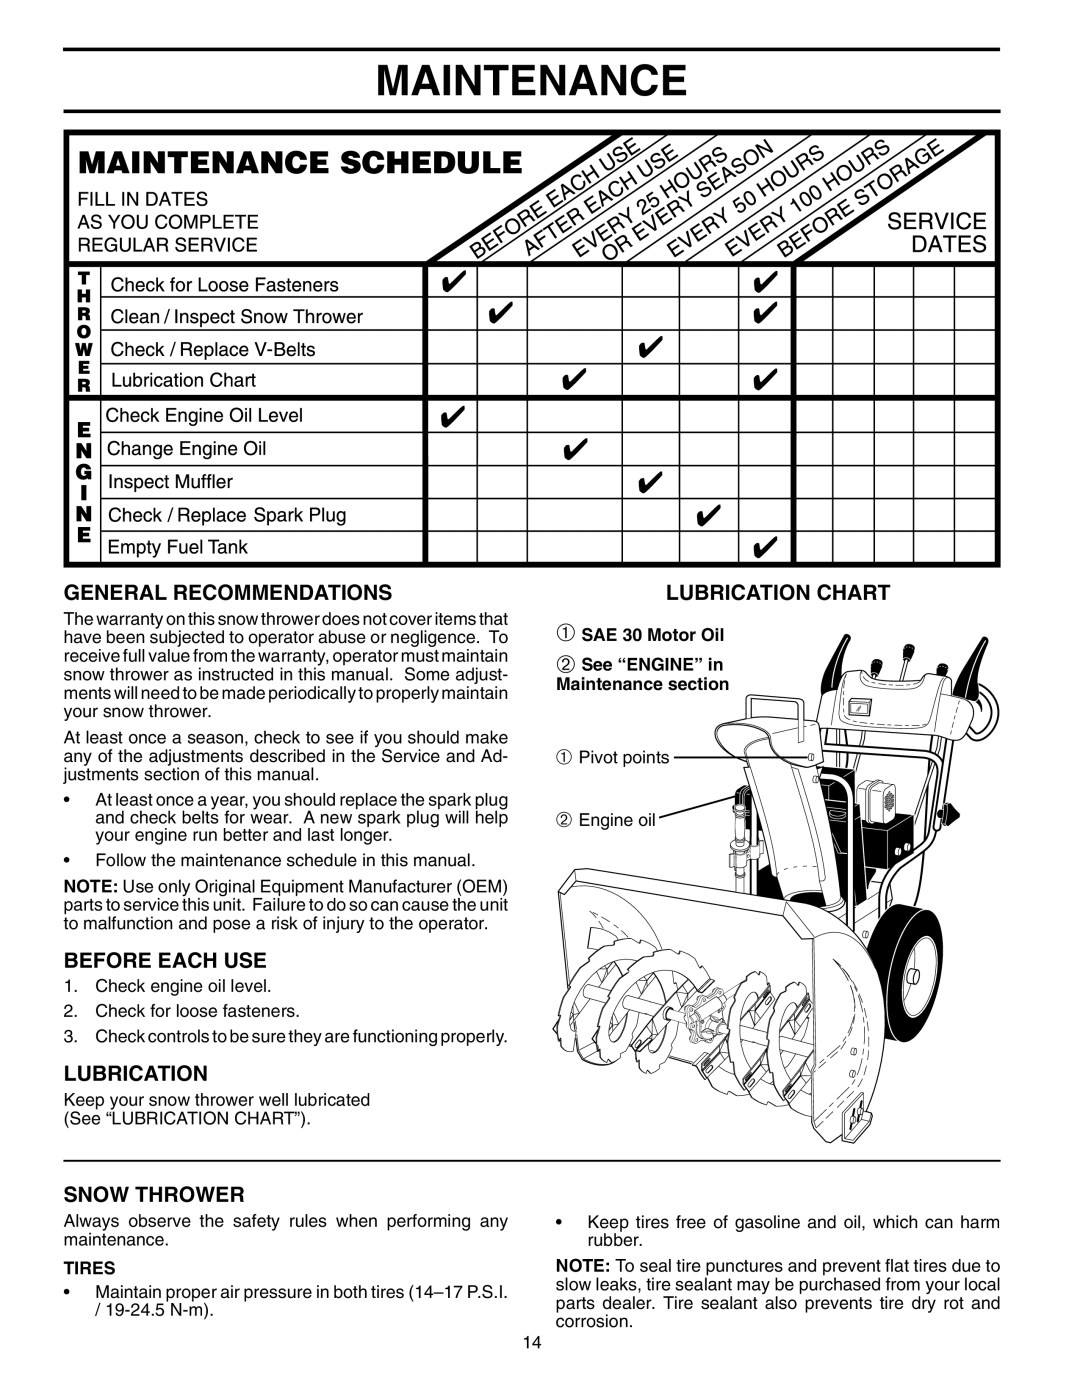 Husqvarna 927SBEXP Maintenance, General Recommendations, Before Each Use, Snow Thrower, Lubrication Chart, Tires 